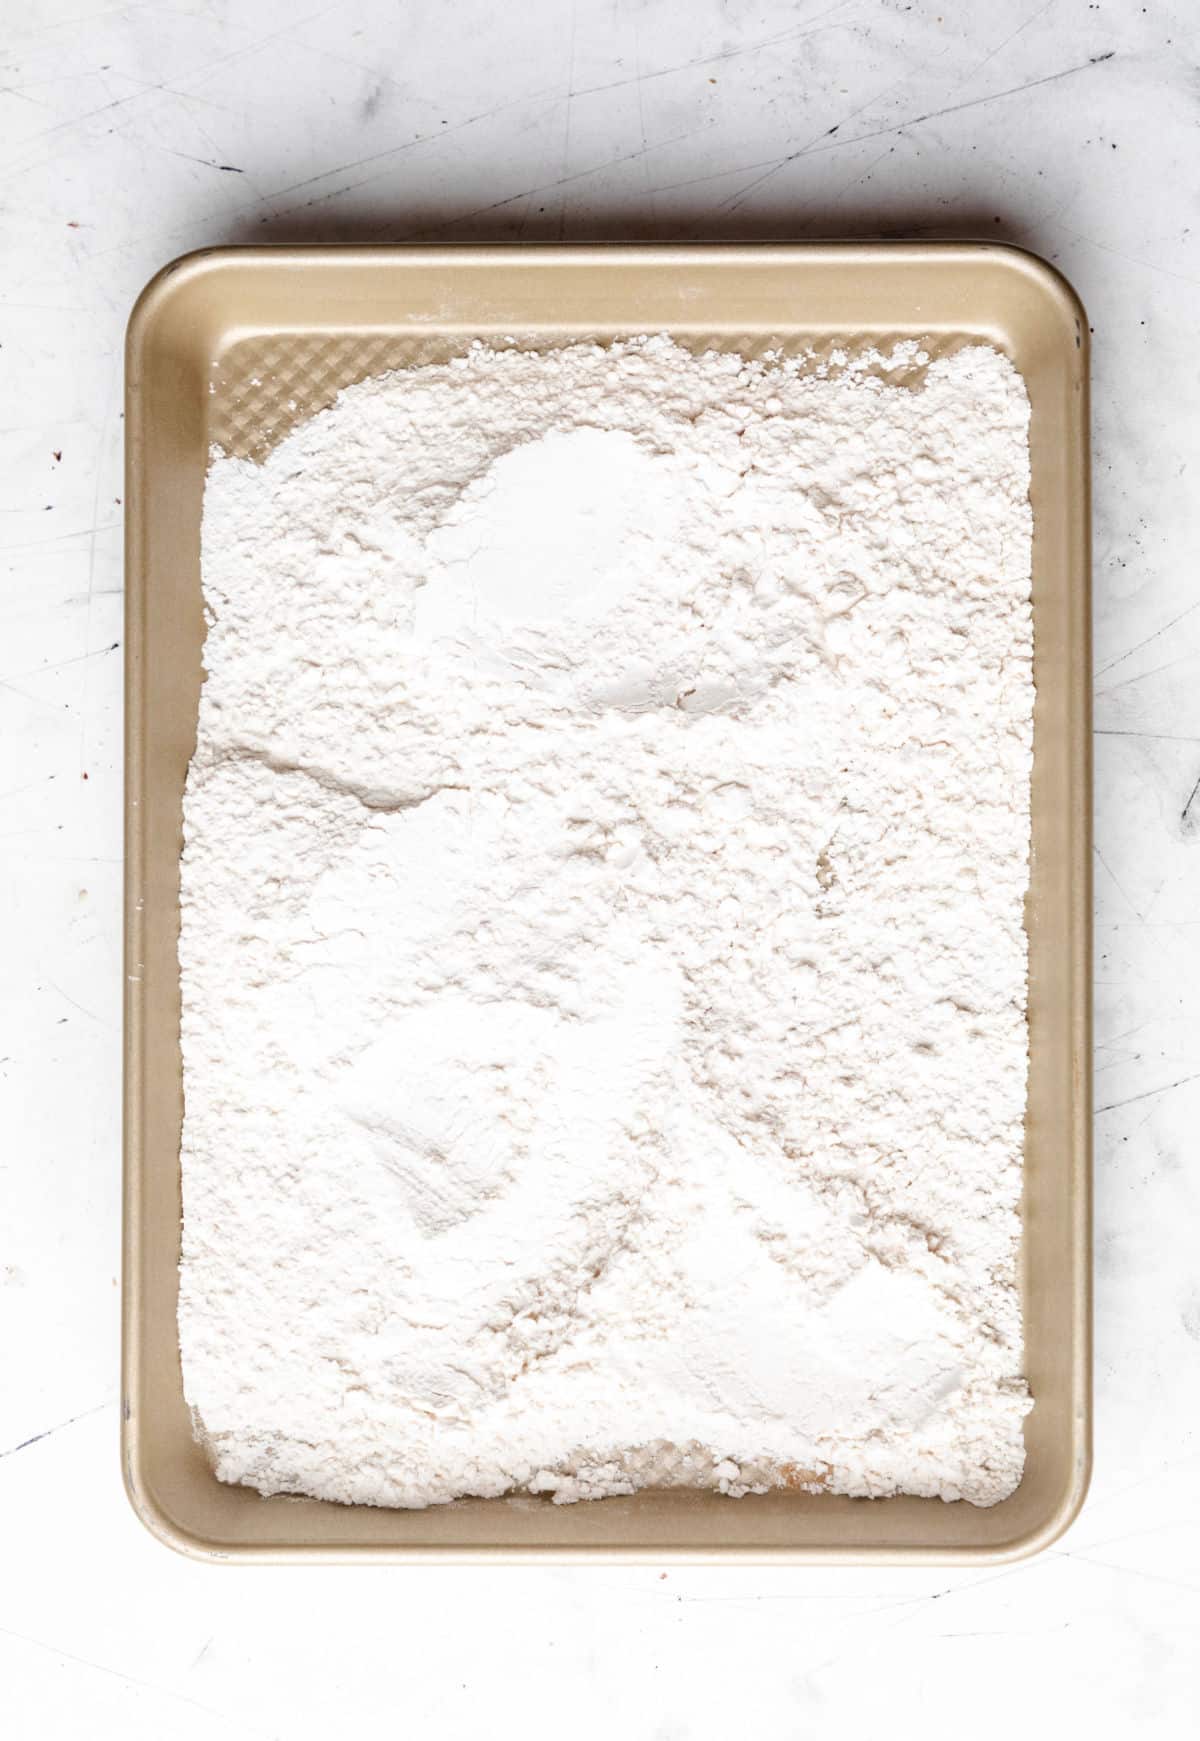 Flour spread out on rimmed baking sheet.